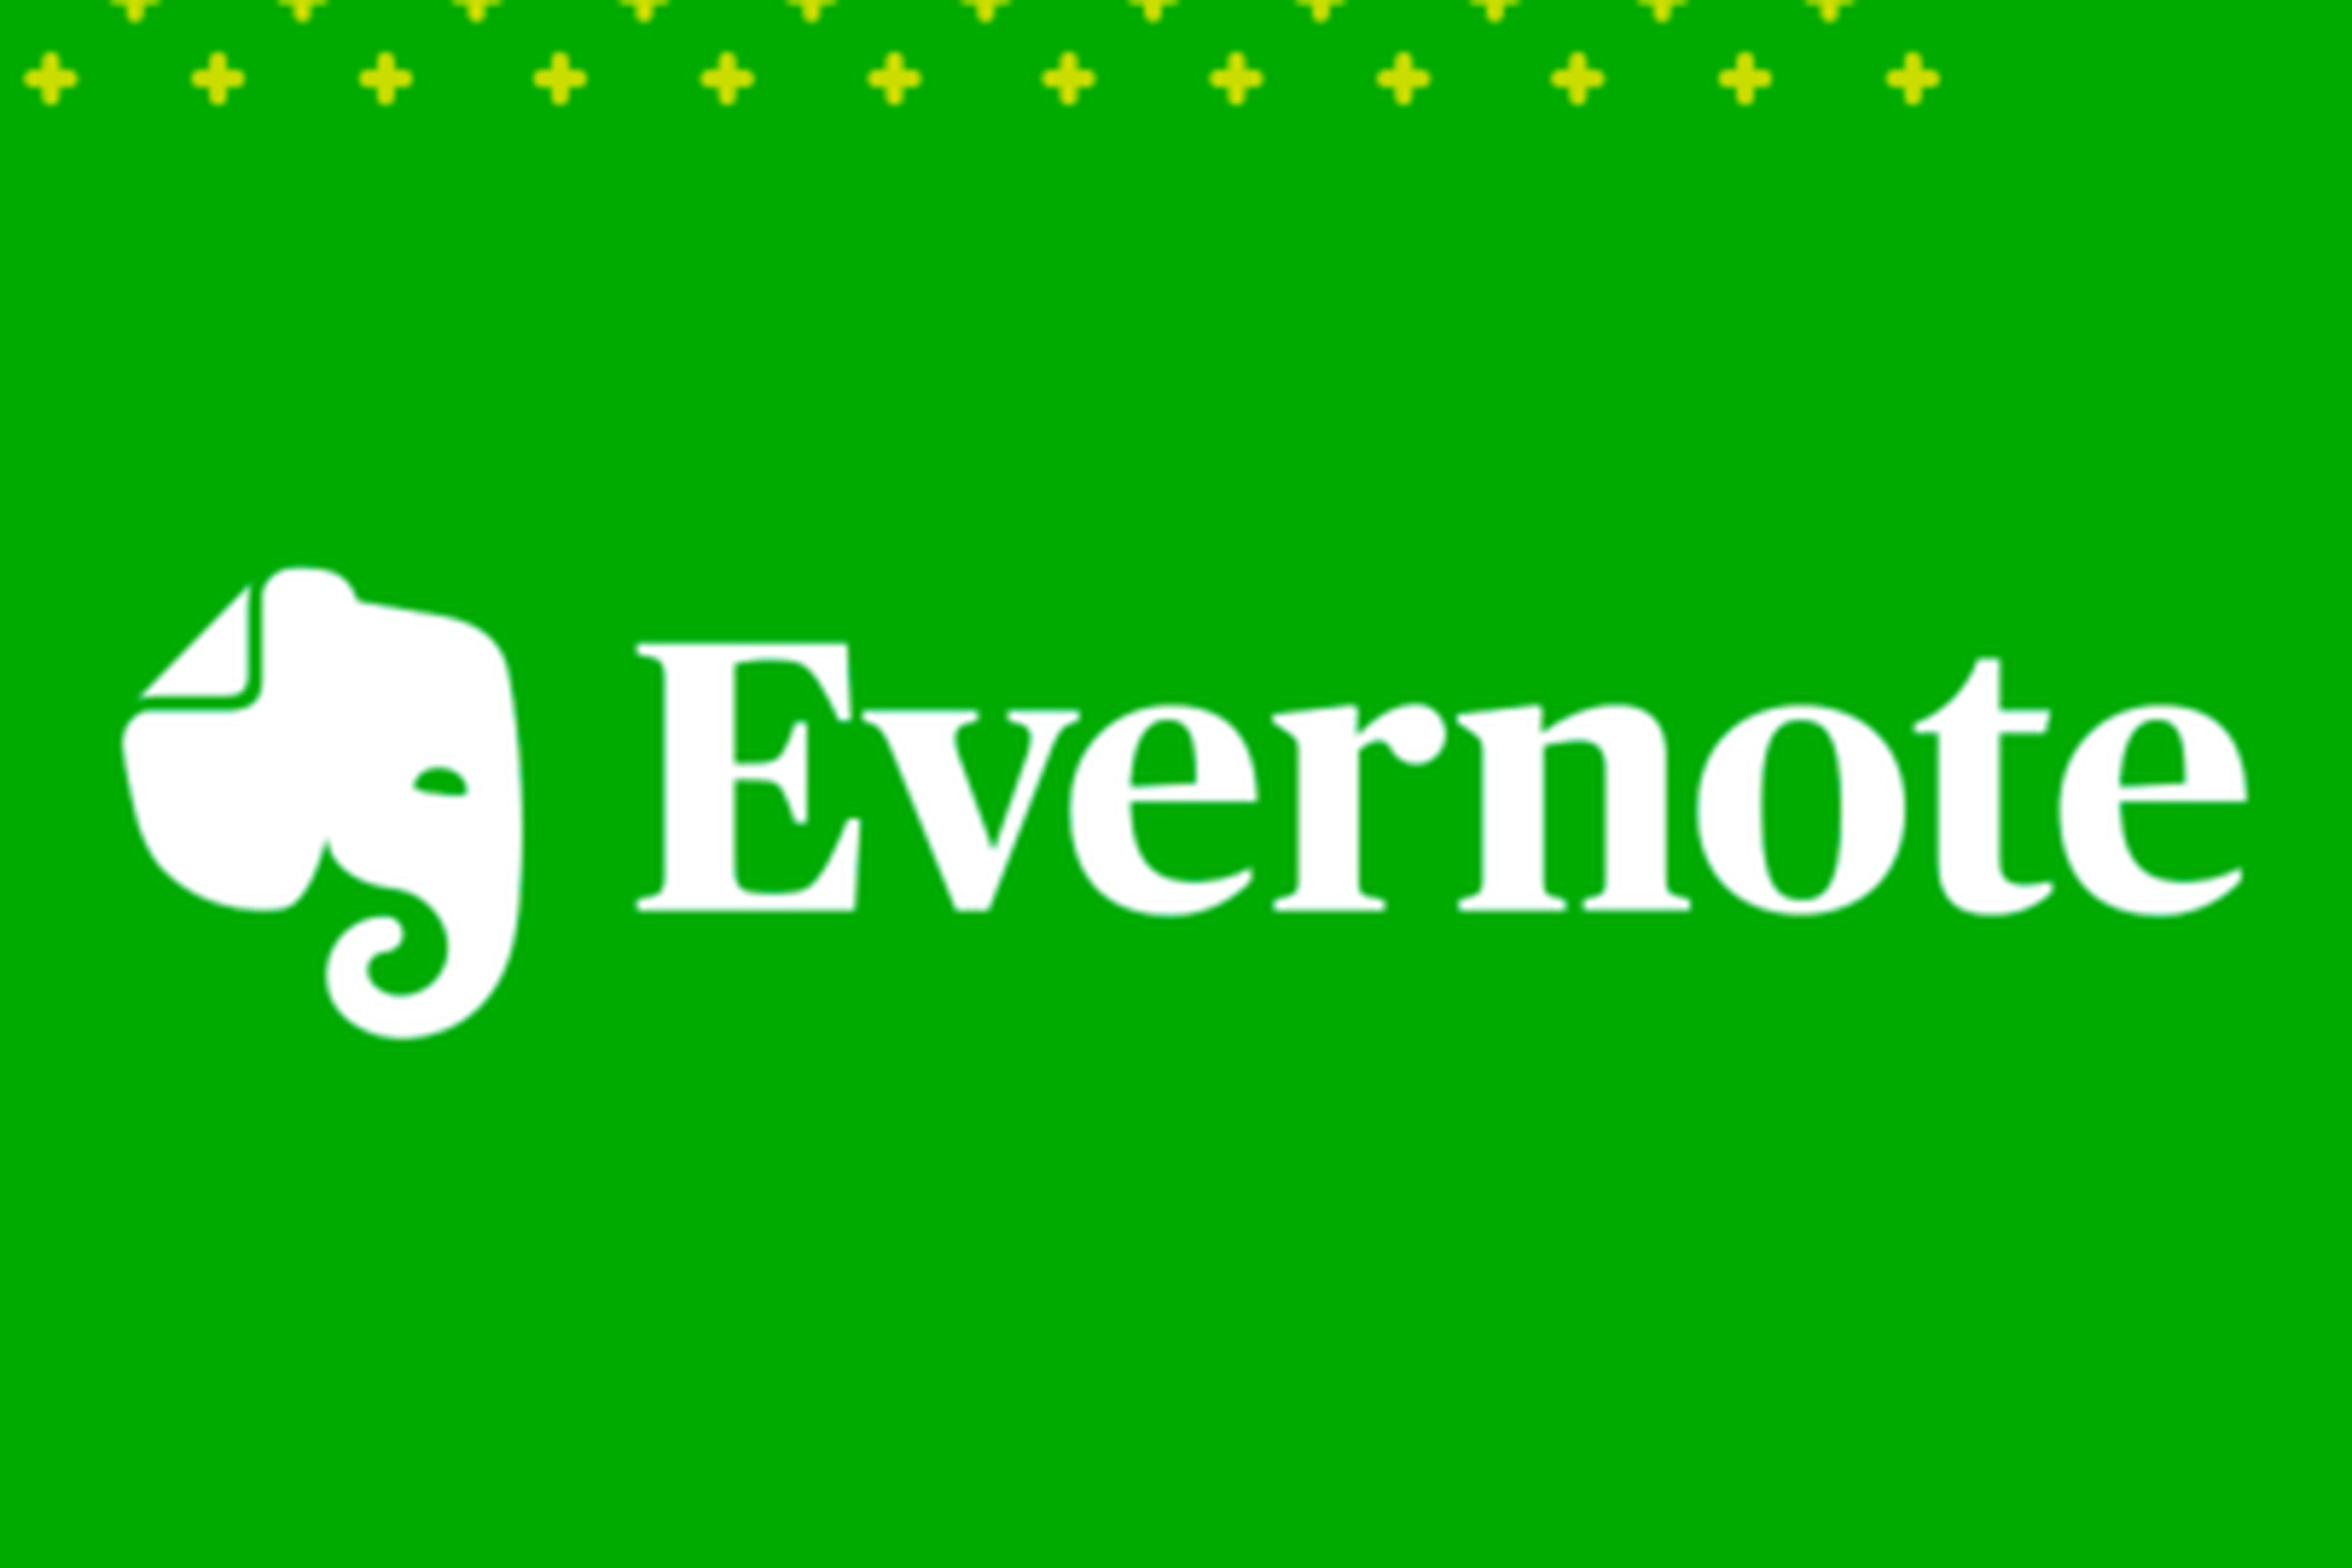 An image showing the Evernote logo